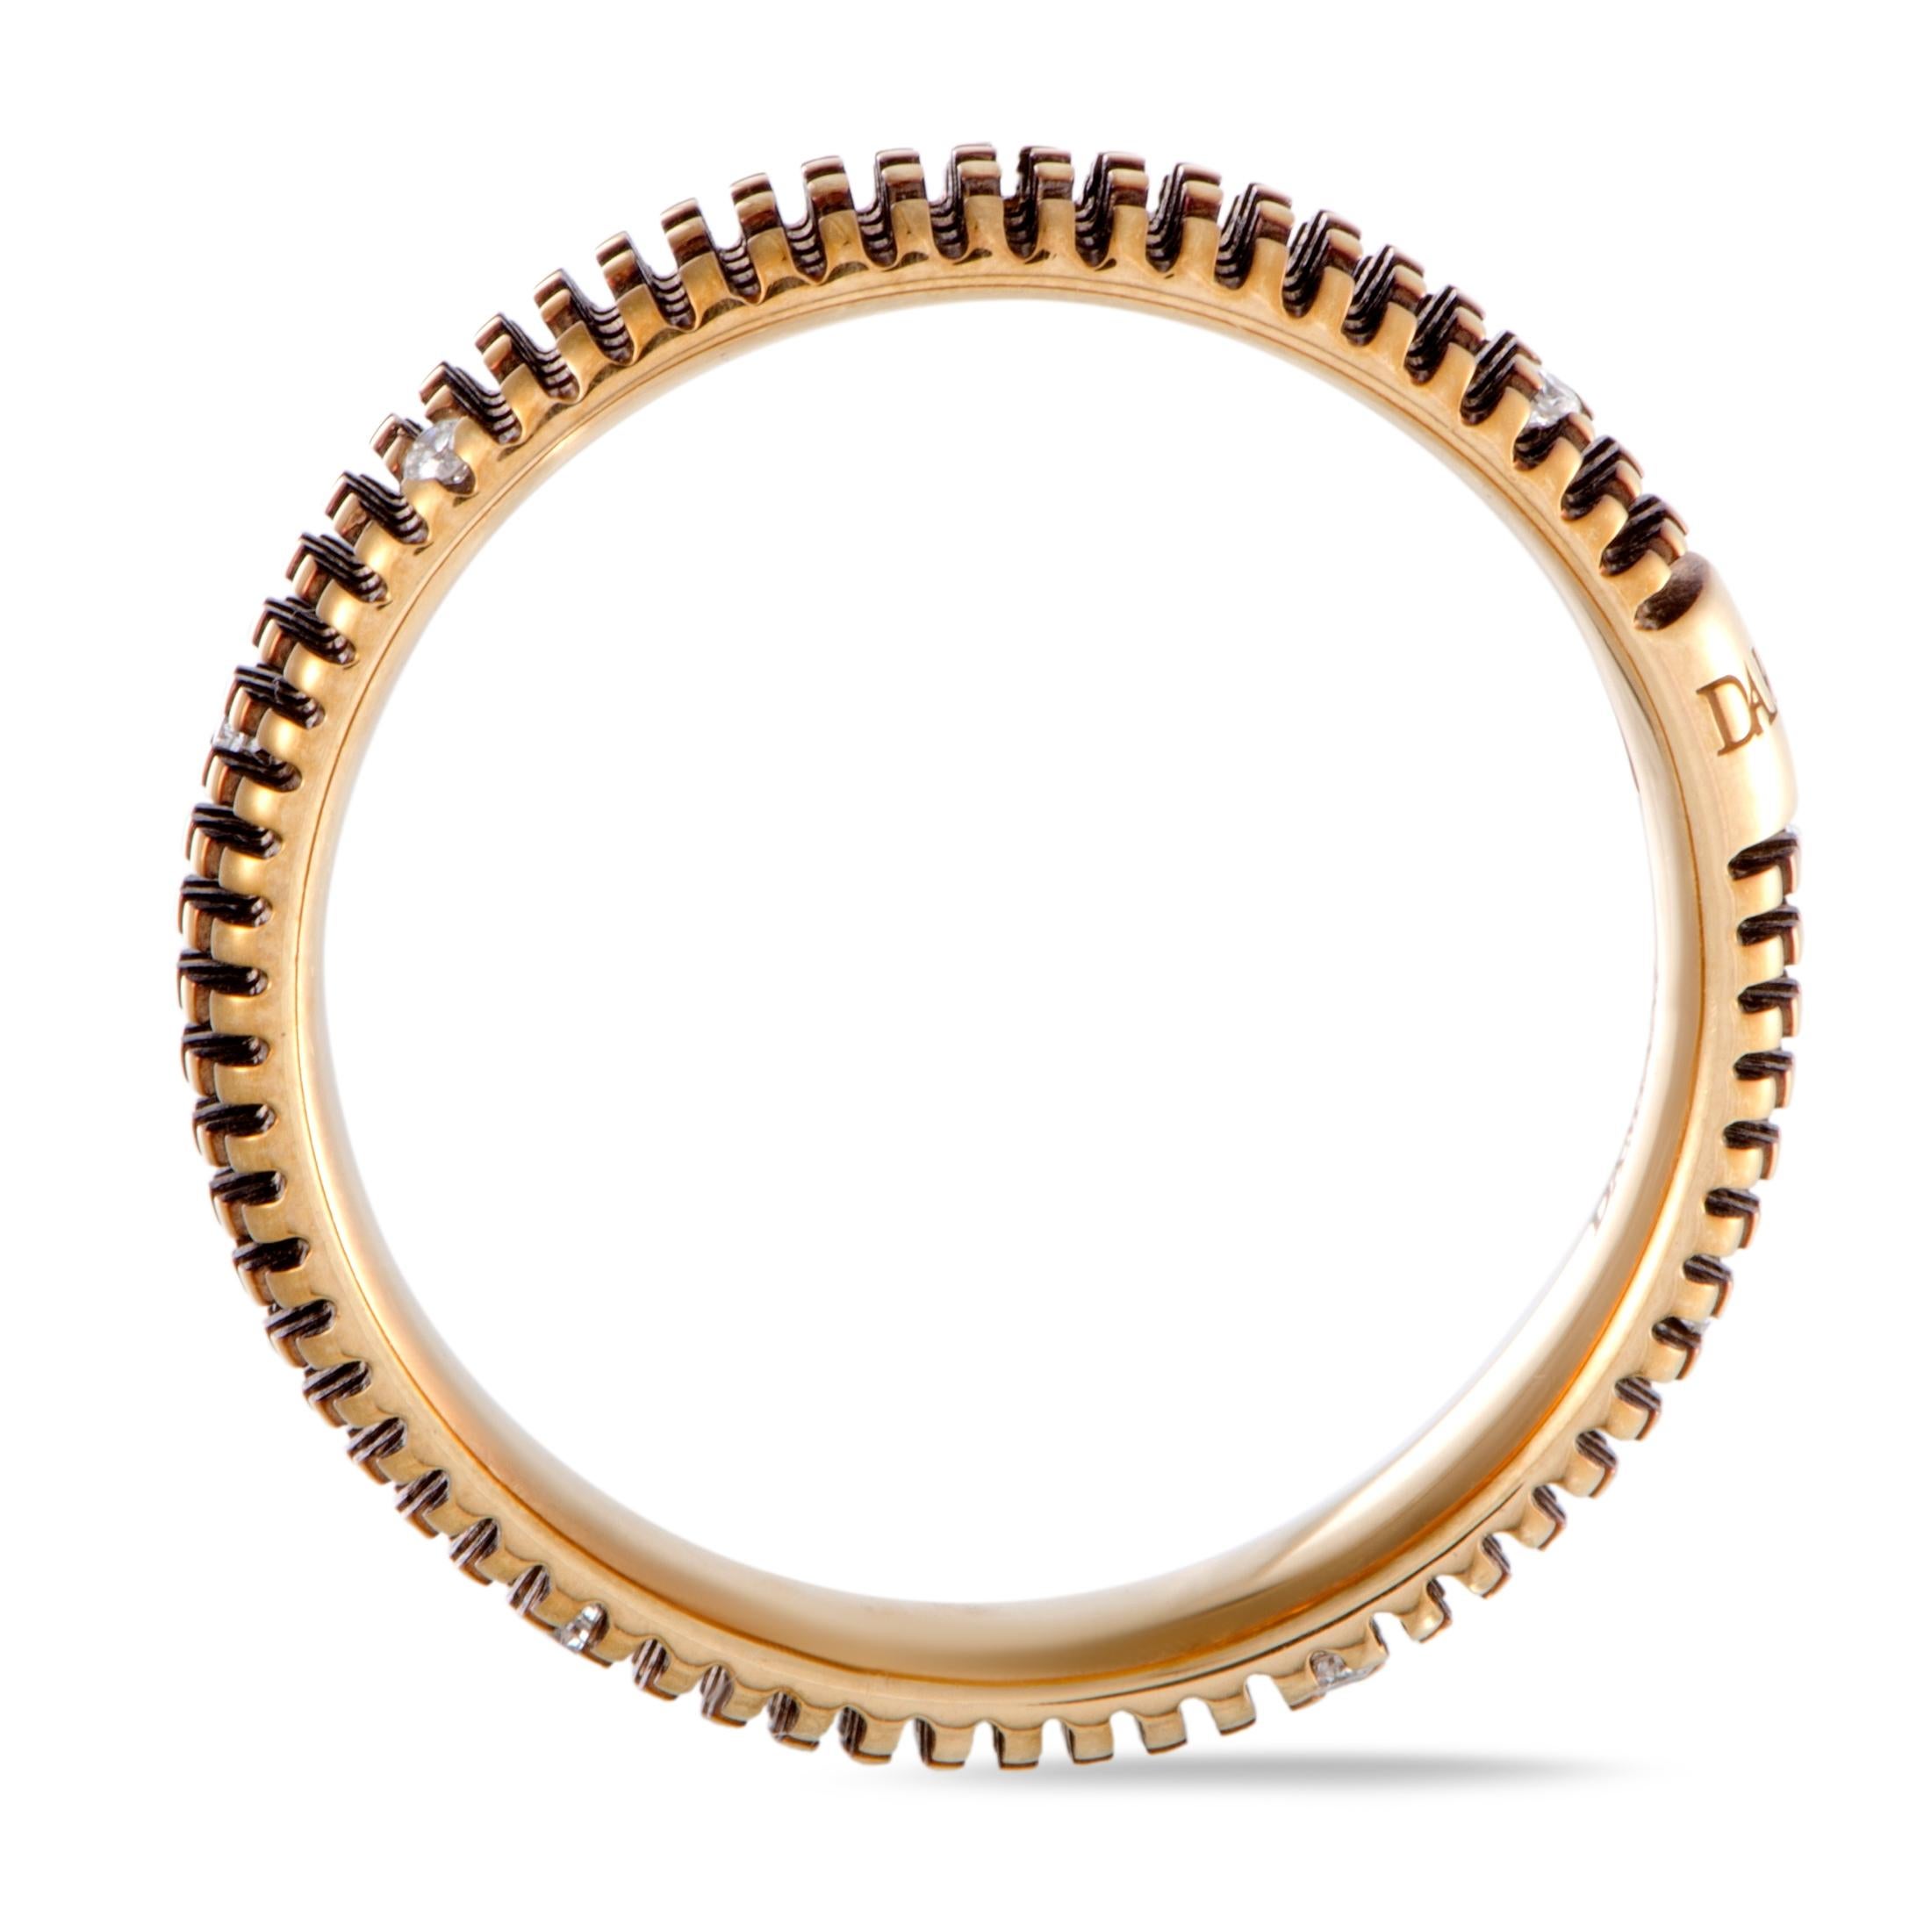 Extraordinarily envisioned, masterfully crafted, and accentuated in a most subtly luxurious fashion, this fascinating jewelry piece offers a stunningly offbeat appearance. The ring is wonderfully designed by Damiani and it is beautifully made of